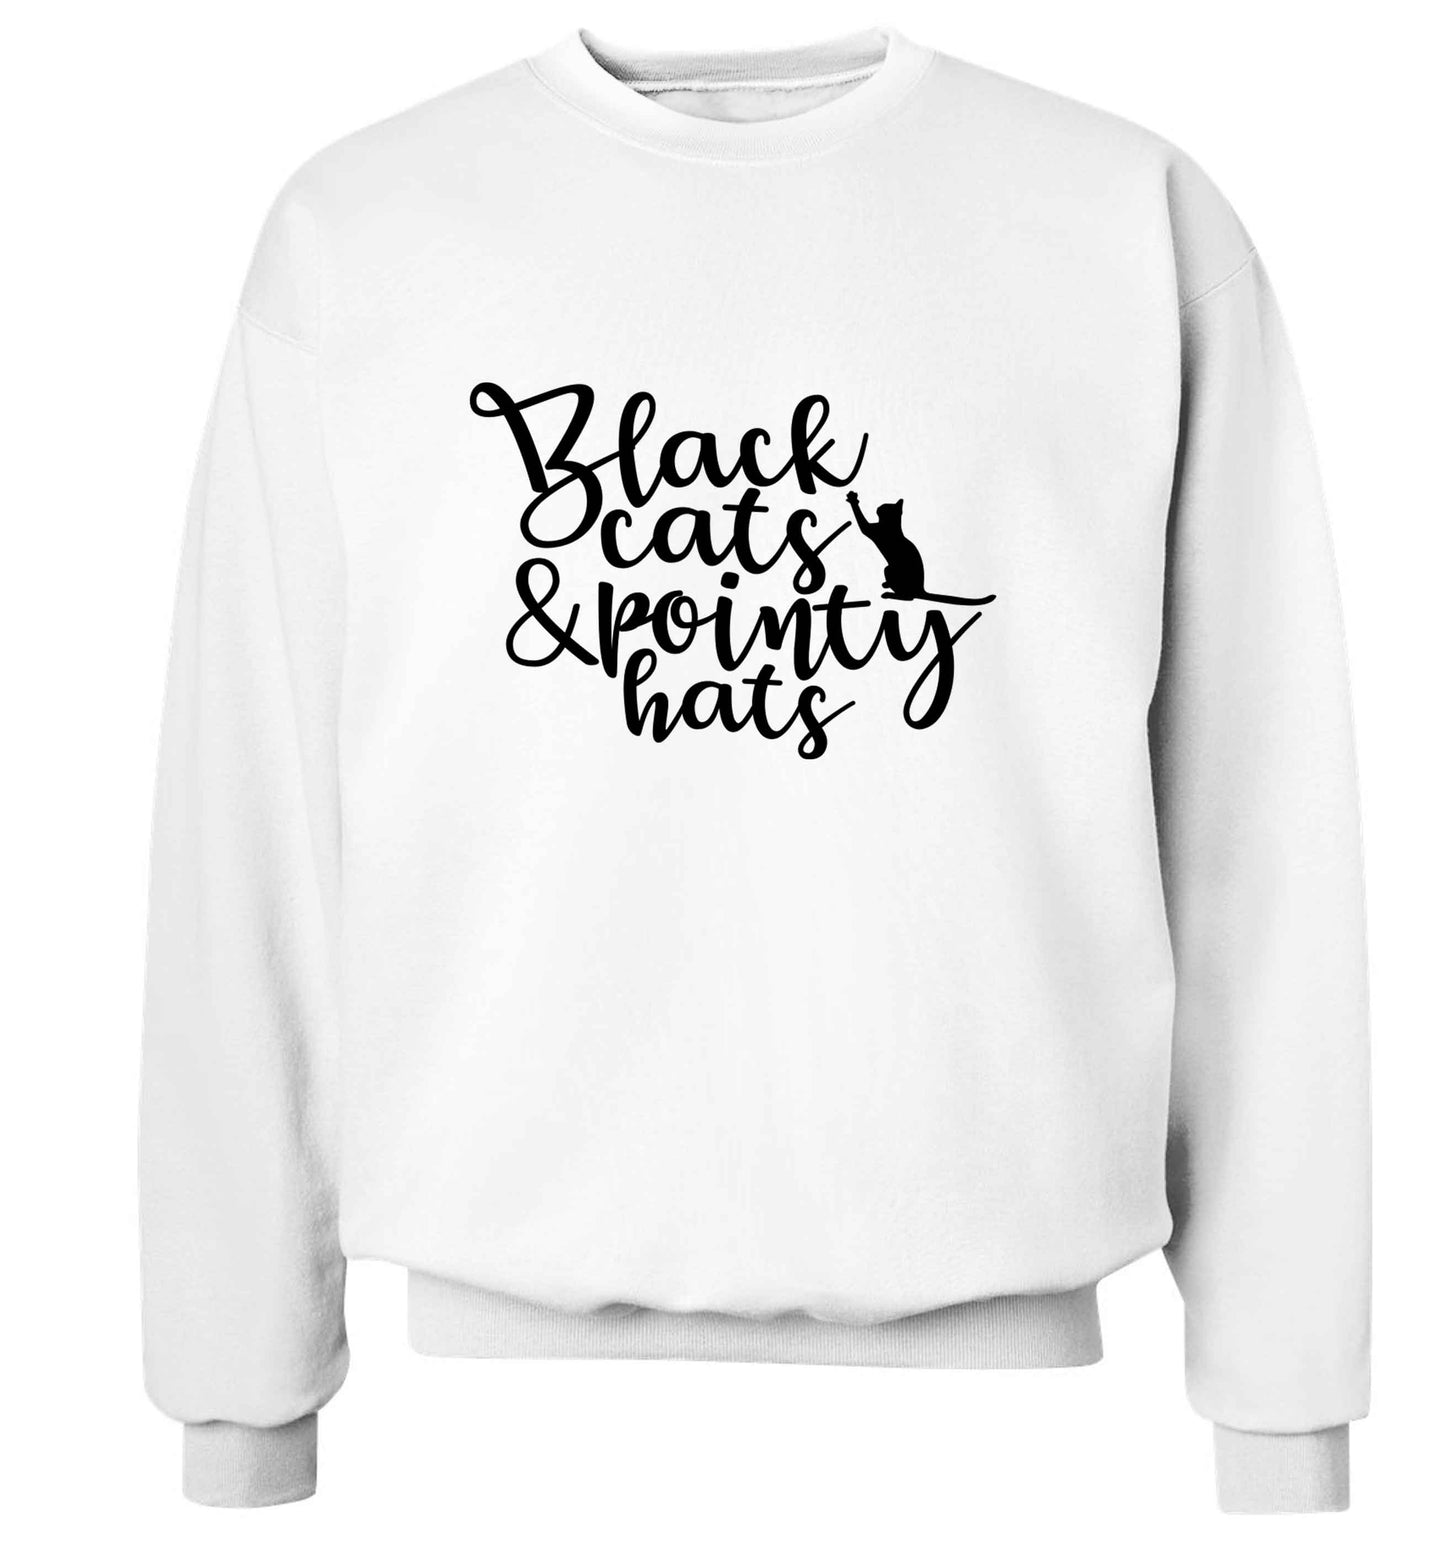 Black cats and pointy hats adult's unisex white sweater 2XL